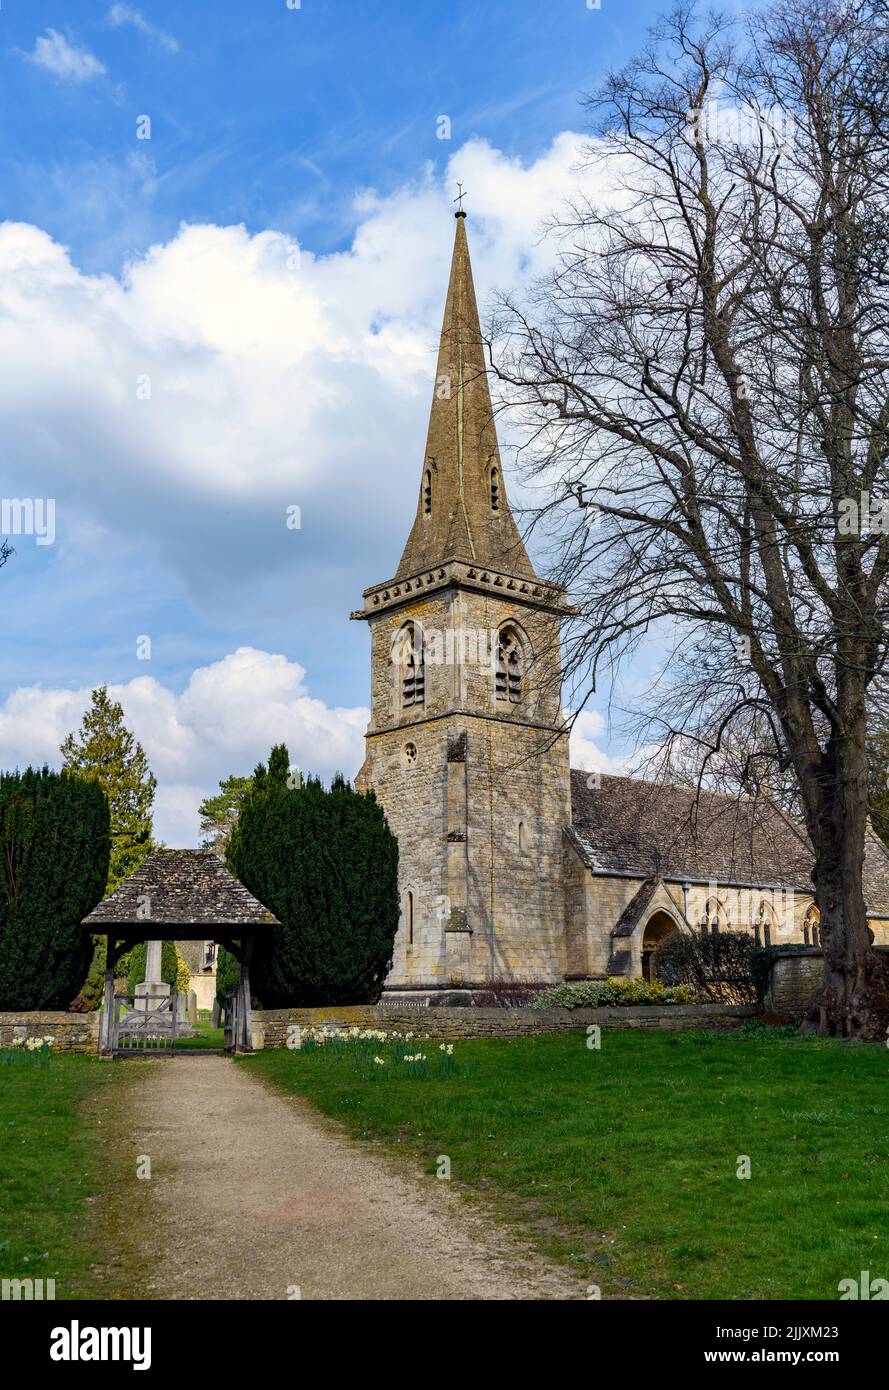 Die Pfarrkirche Saint Mary Lower Slaughter, Cotswold, Gloucestershire, England. Stockfoto